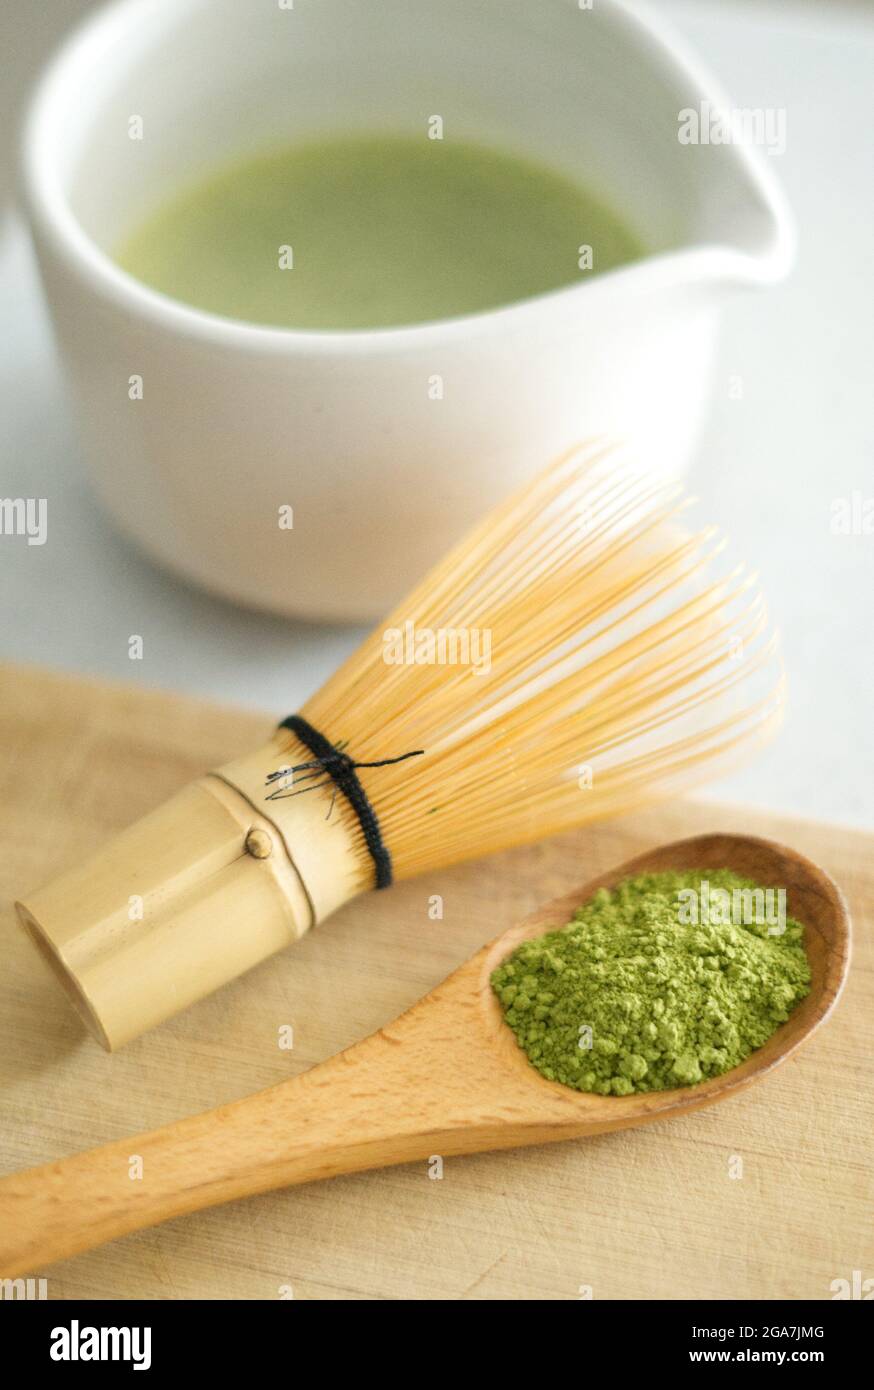 Mixing green Japanese matcha powder in a white ceramic chawan with brown  bamboo wood chasen Stock Photo - Alamy